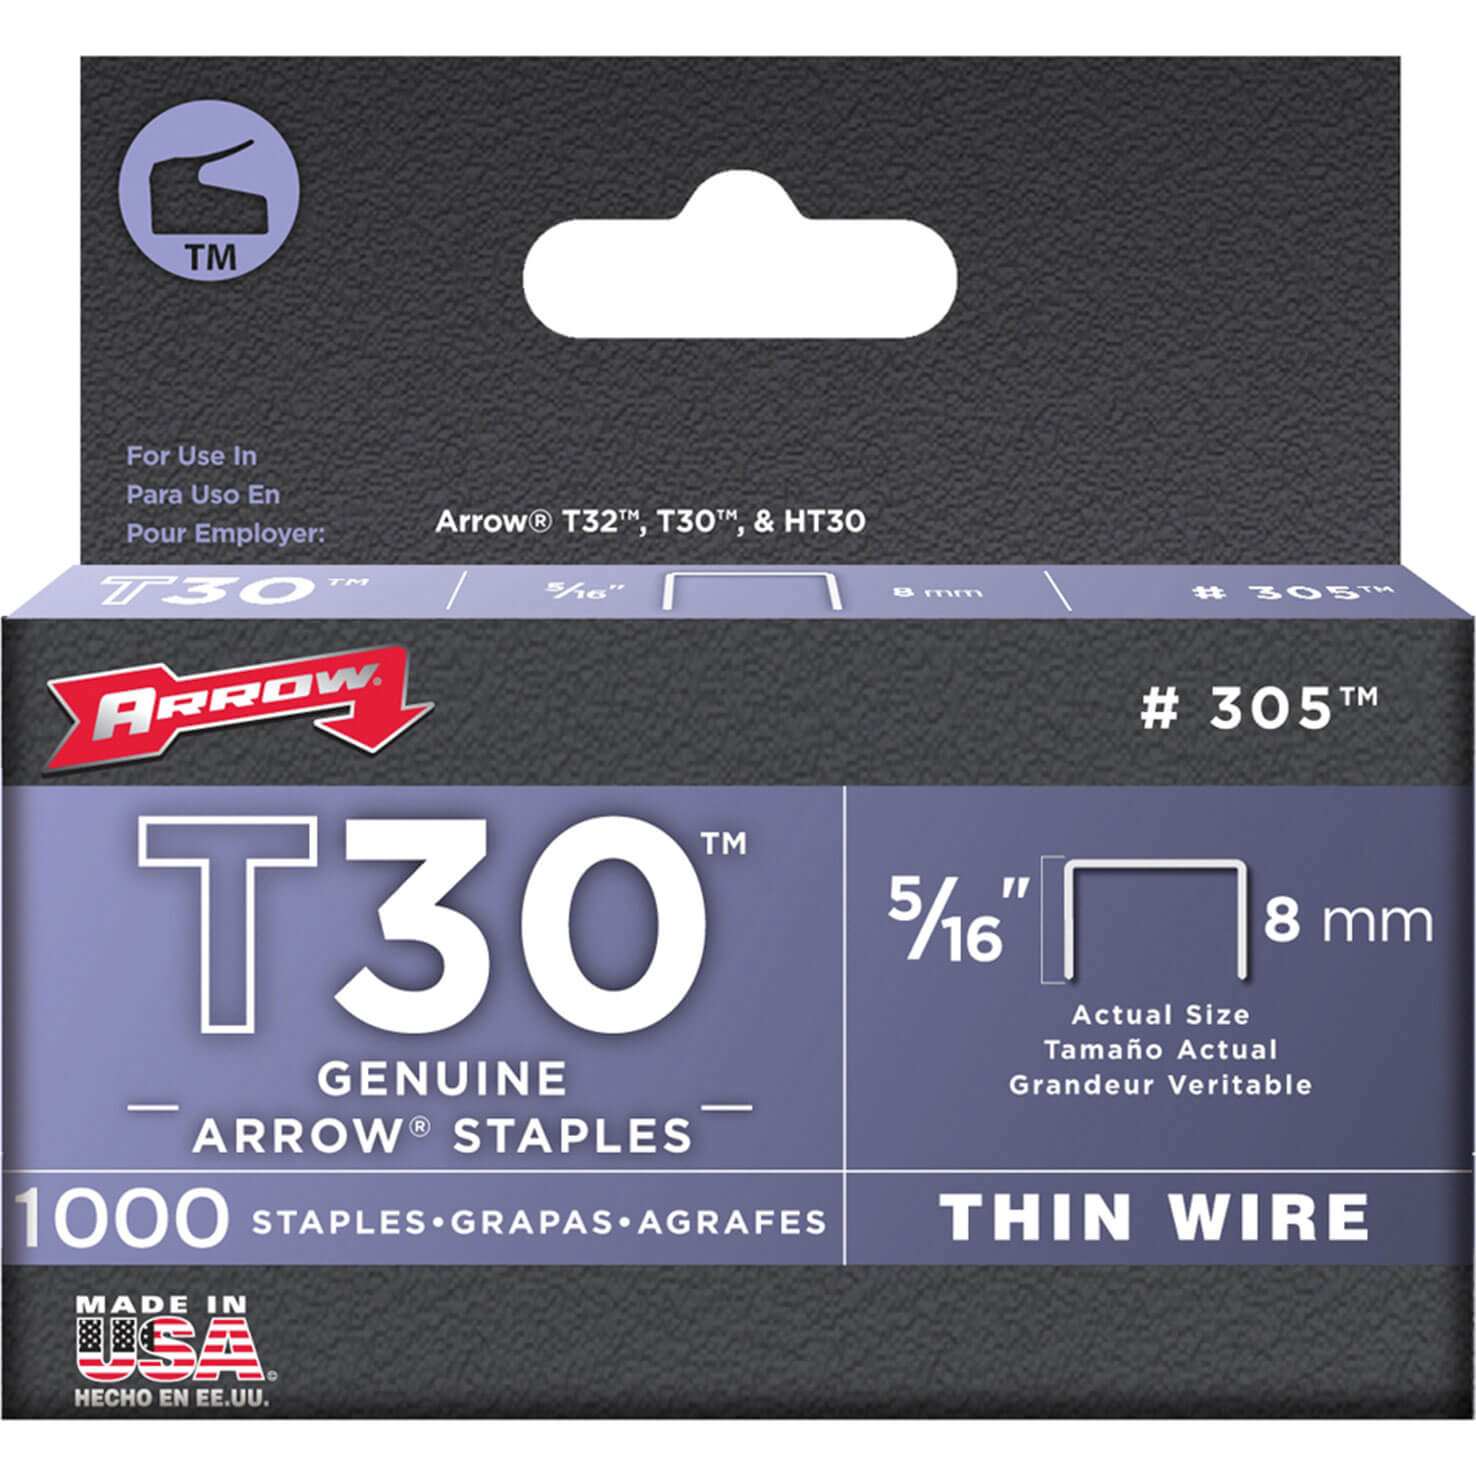 Photos - Staples Arrow T30  8mm Pack of 5000 